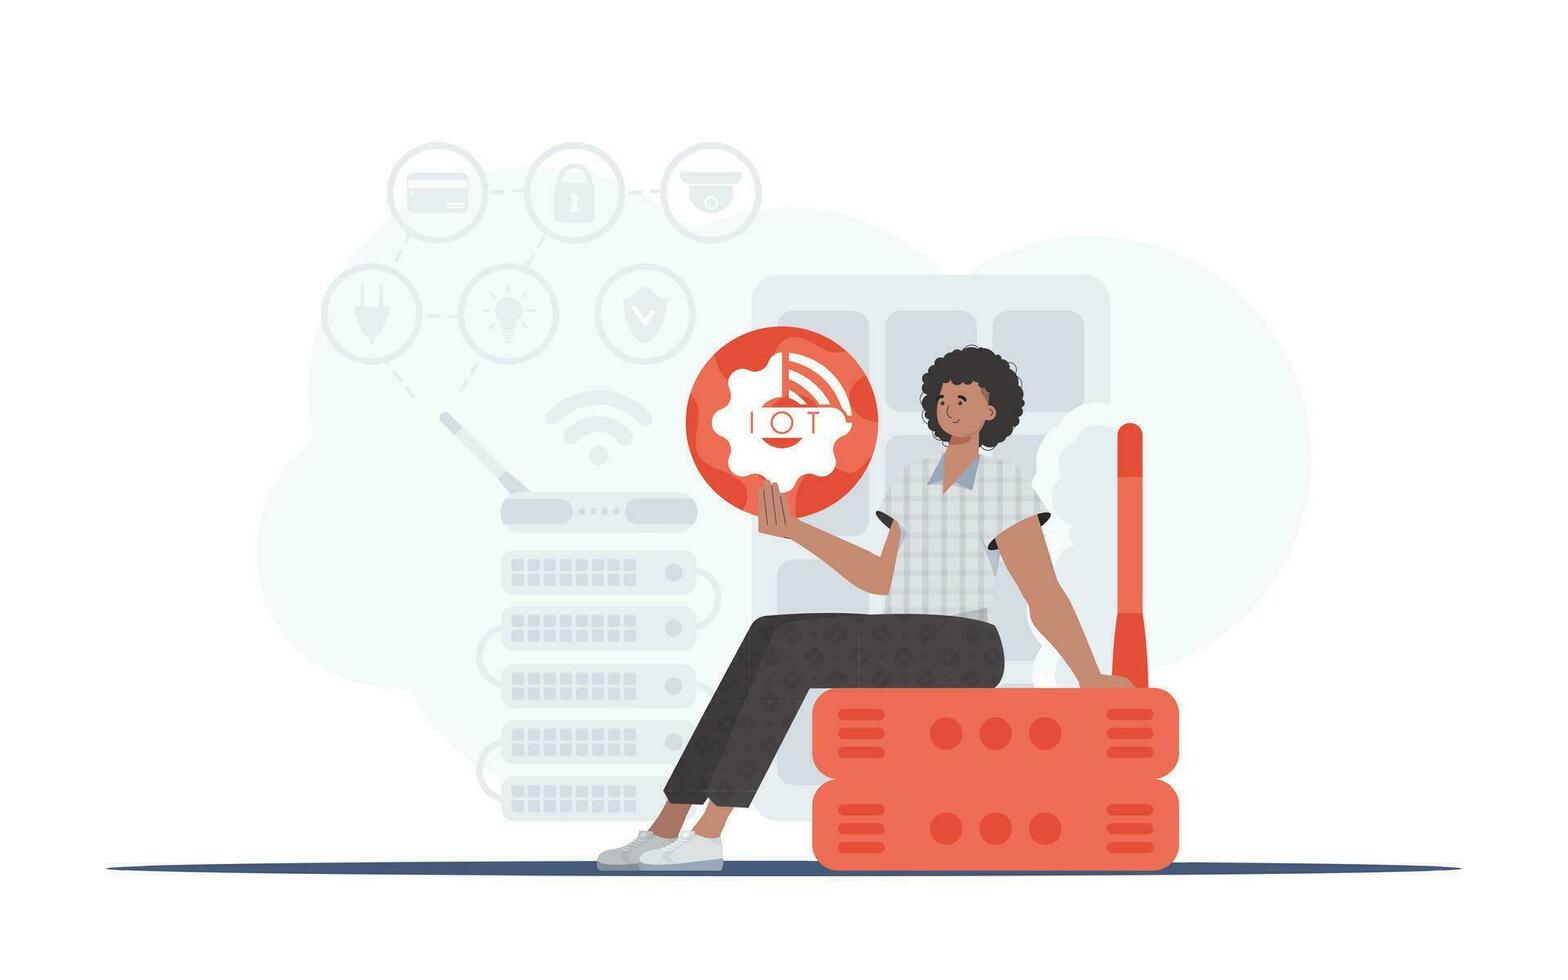 IoT concept. A man is holding an internet thing icon in her hands. Router and server. Good for presentations and websites. Vector illustration in flat style.